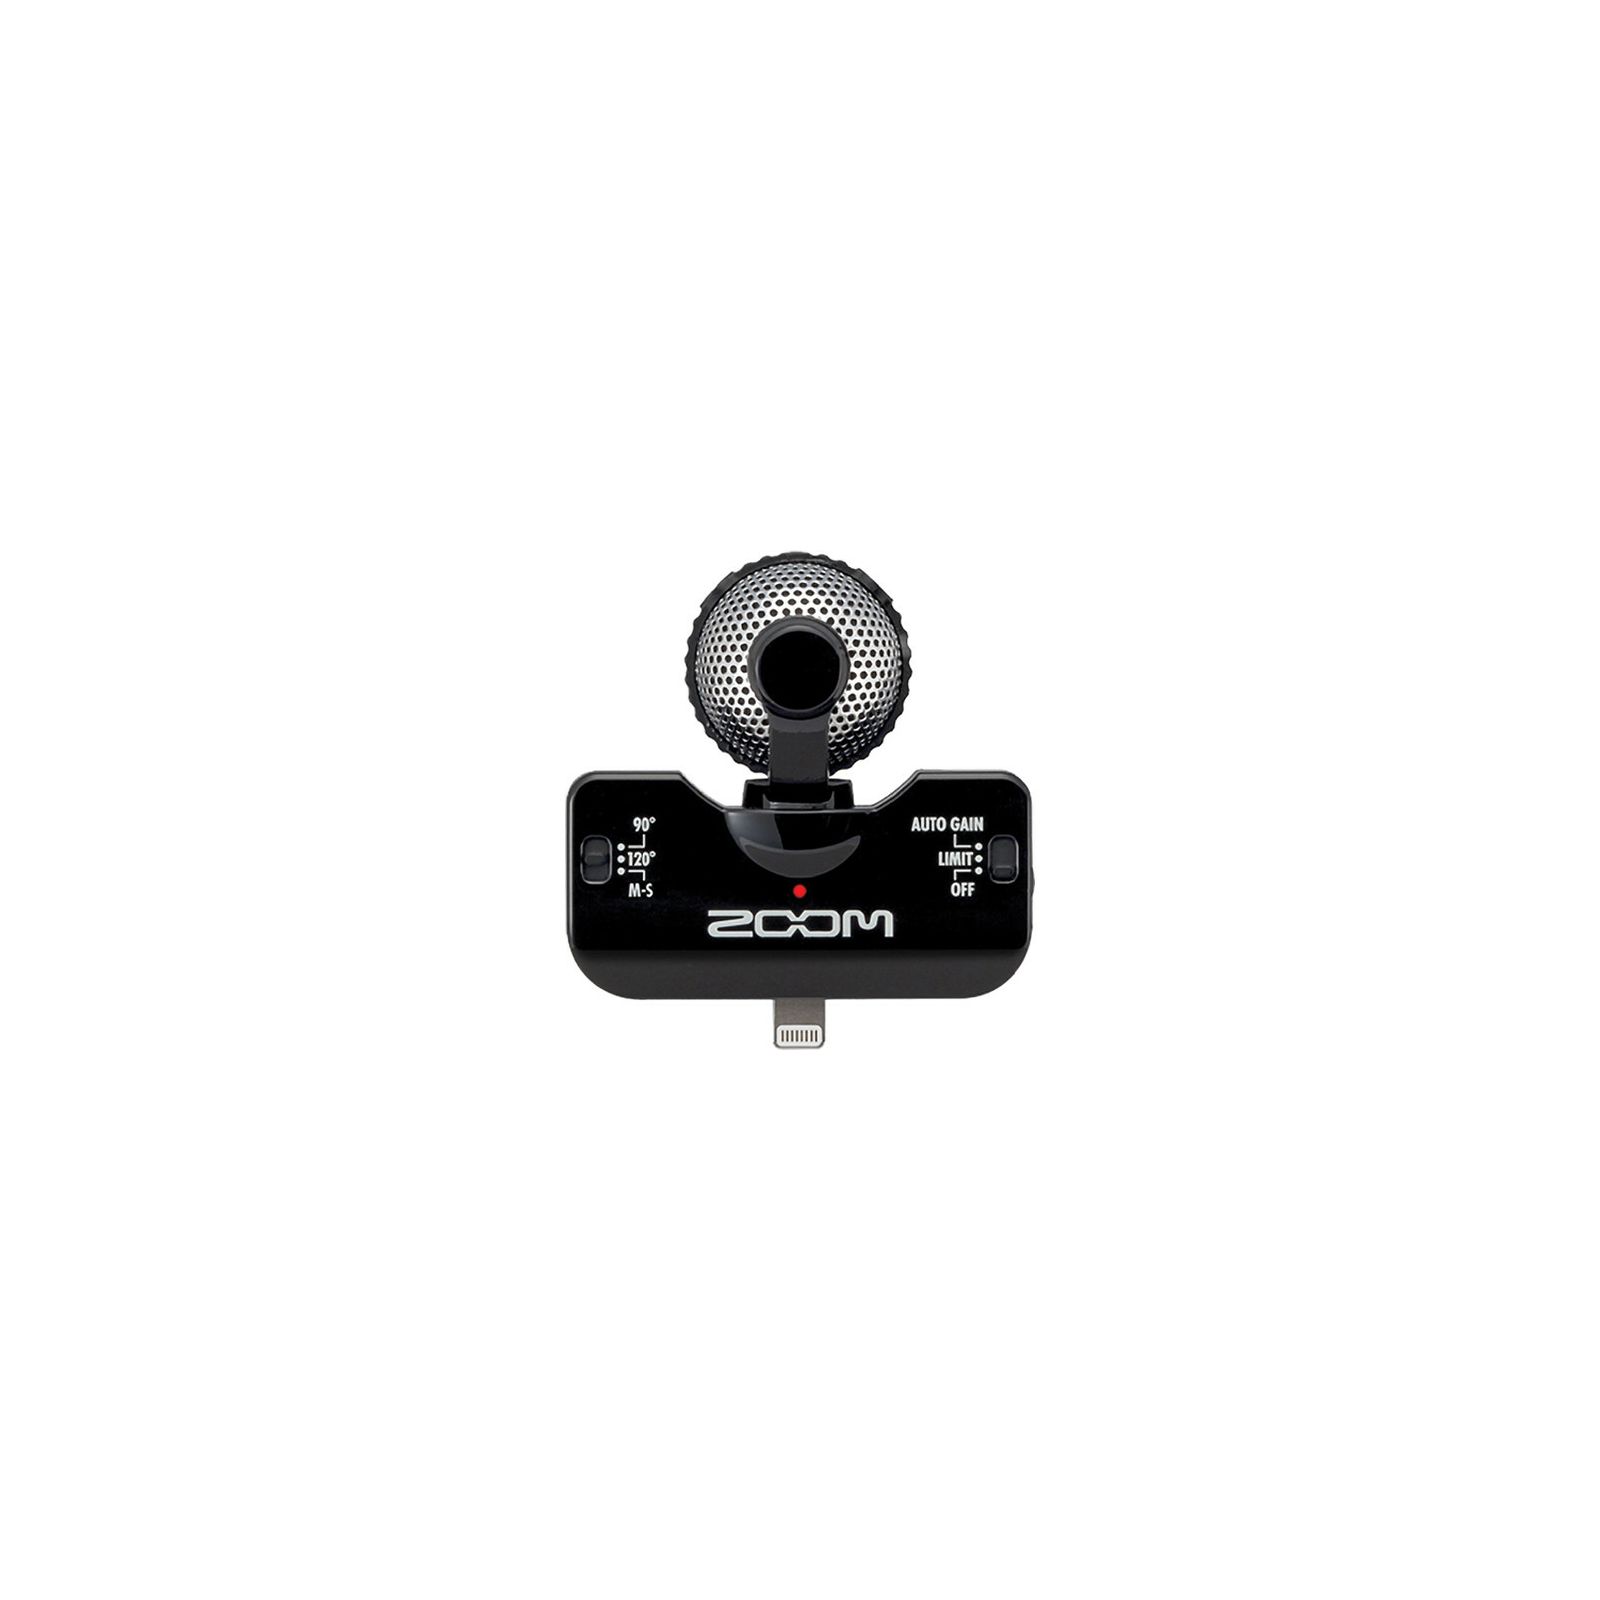 Zoom iQ5 Stereo Microphone for iOS Devices with Lightning Connector (Black) stereo mikrofon za iPhone iPad